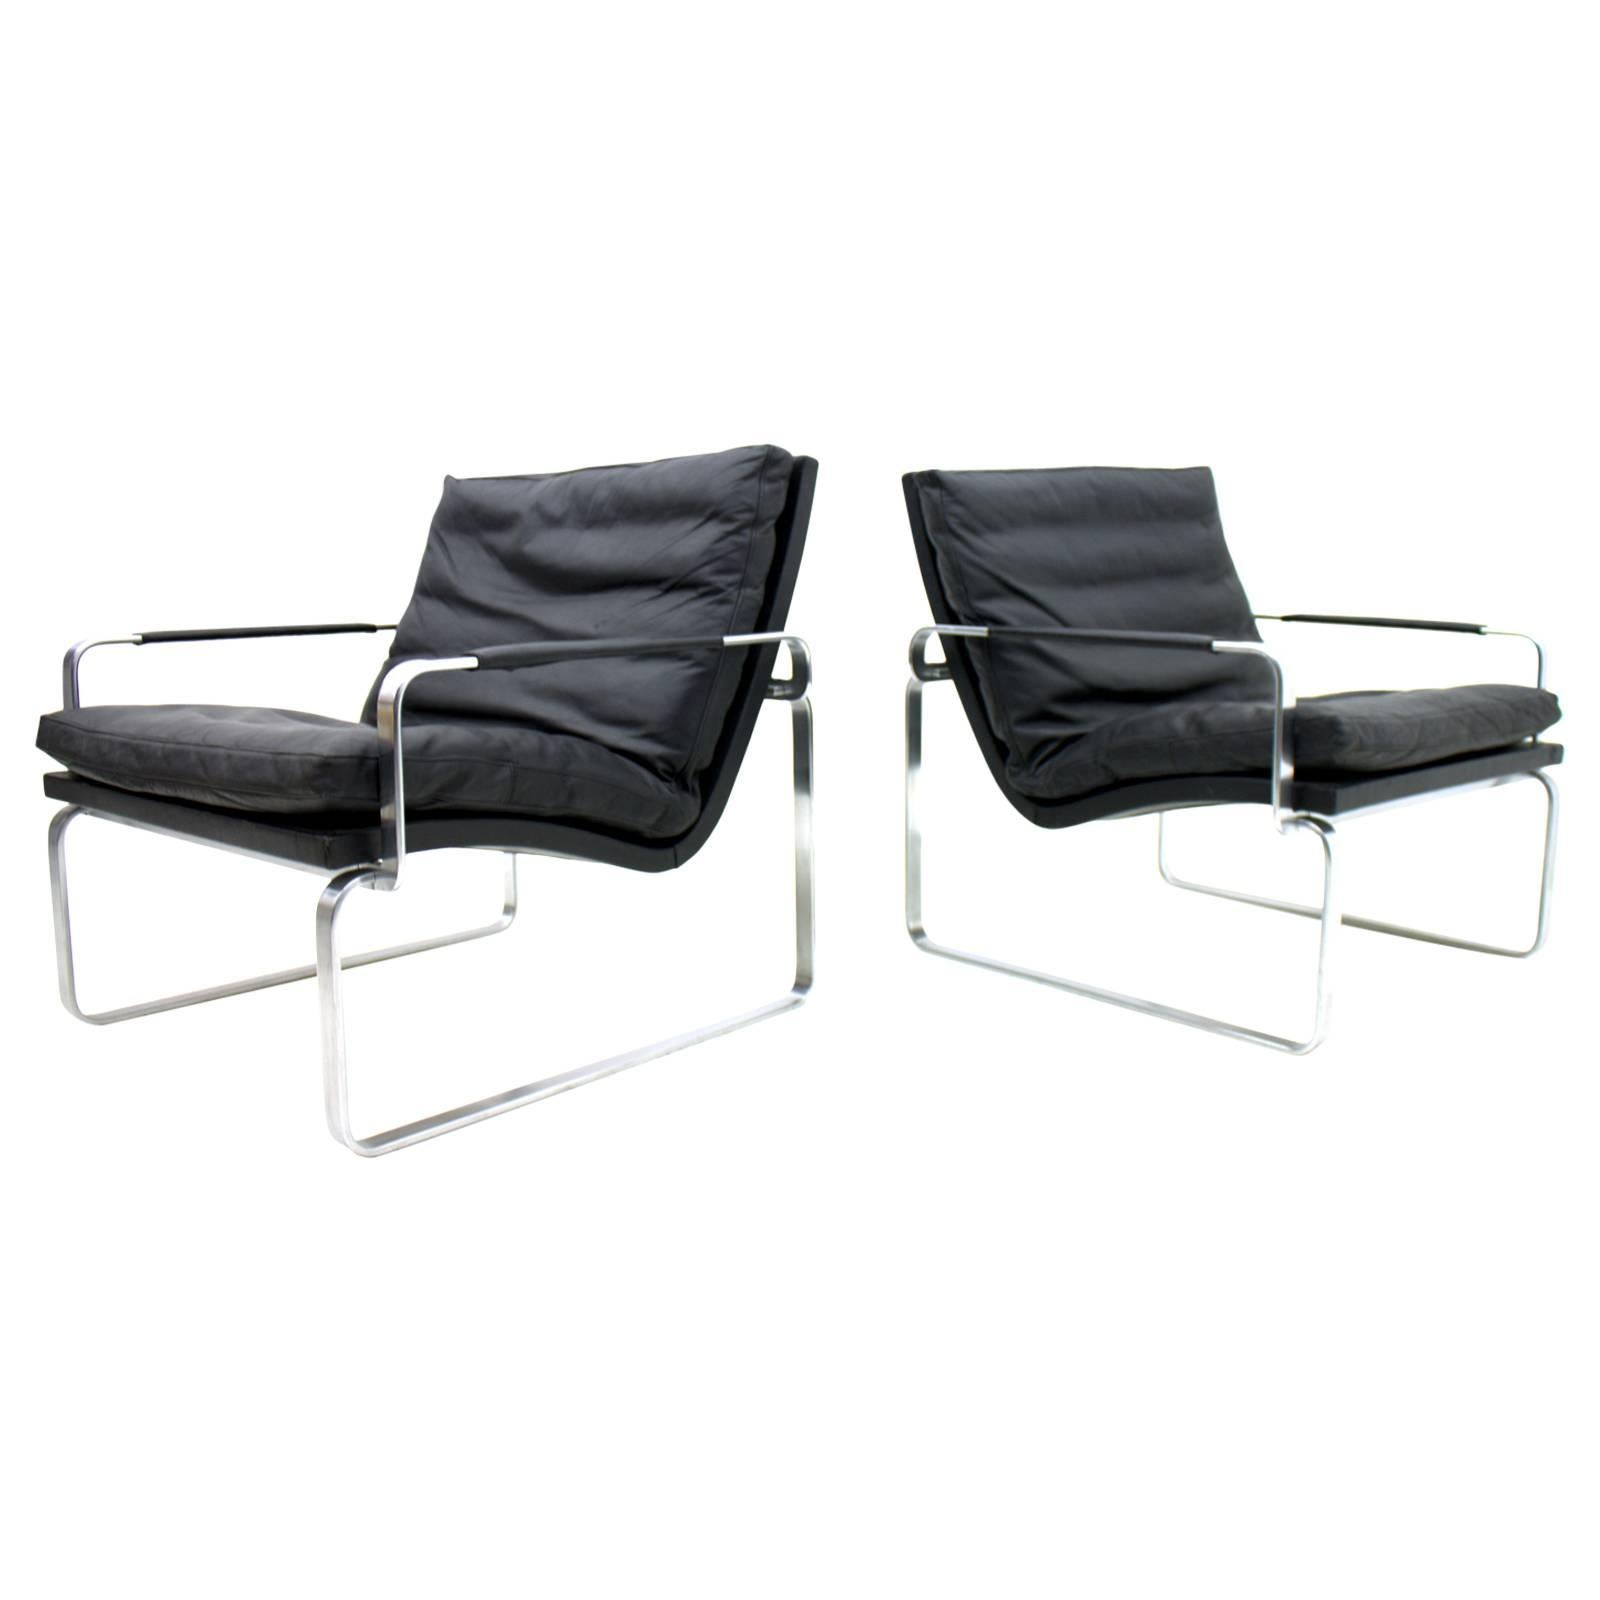 Pair of Danish Lounge Chairs by Jørgen Lund & Ole Larsen for Bo-Ex